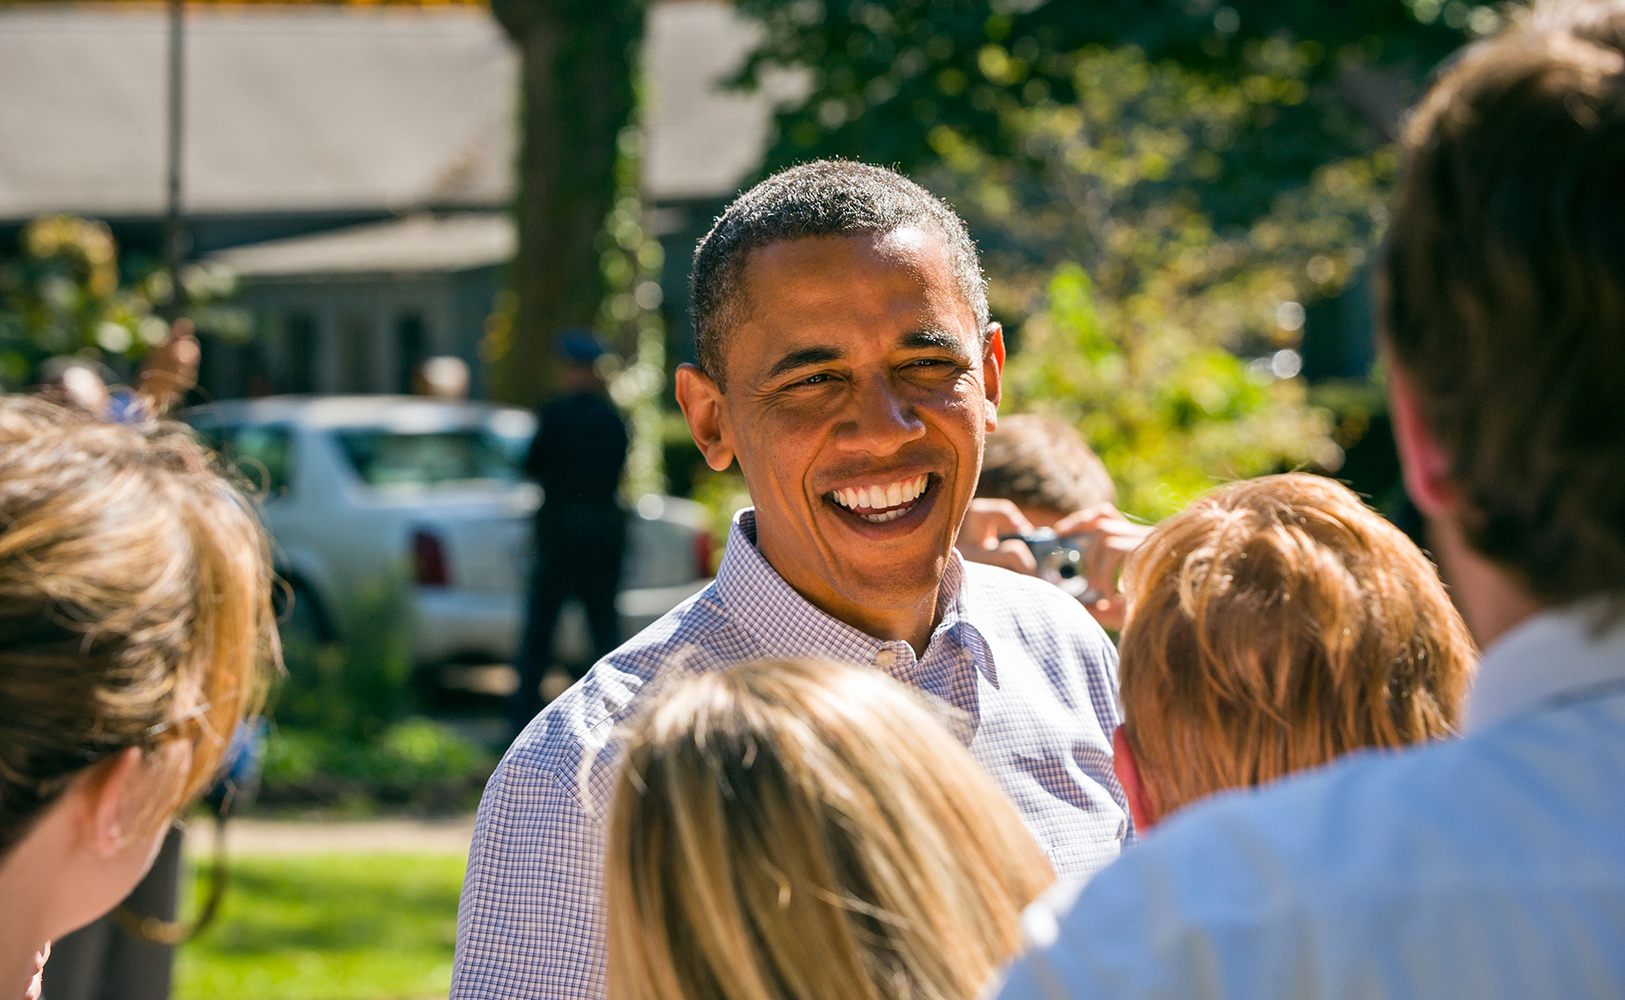 President Barack Obama with constituents in Iowa